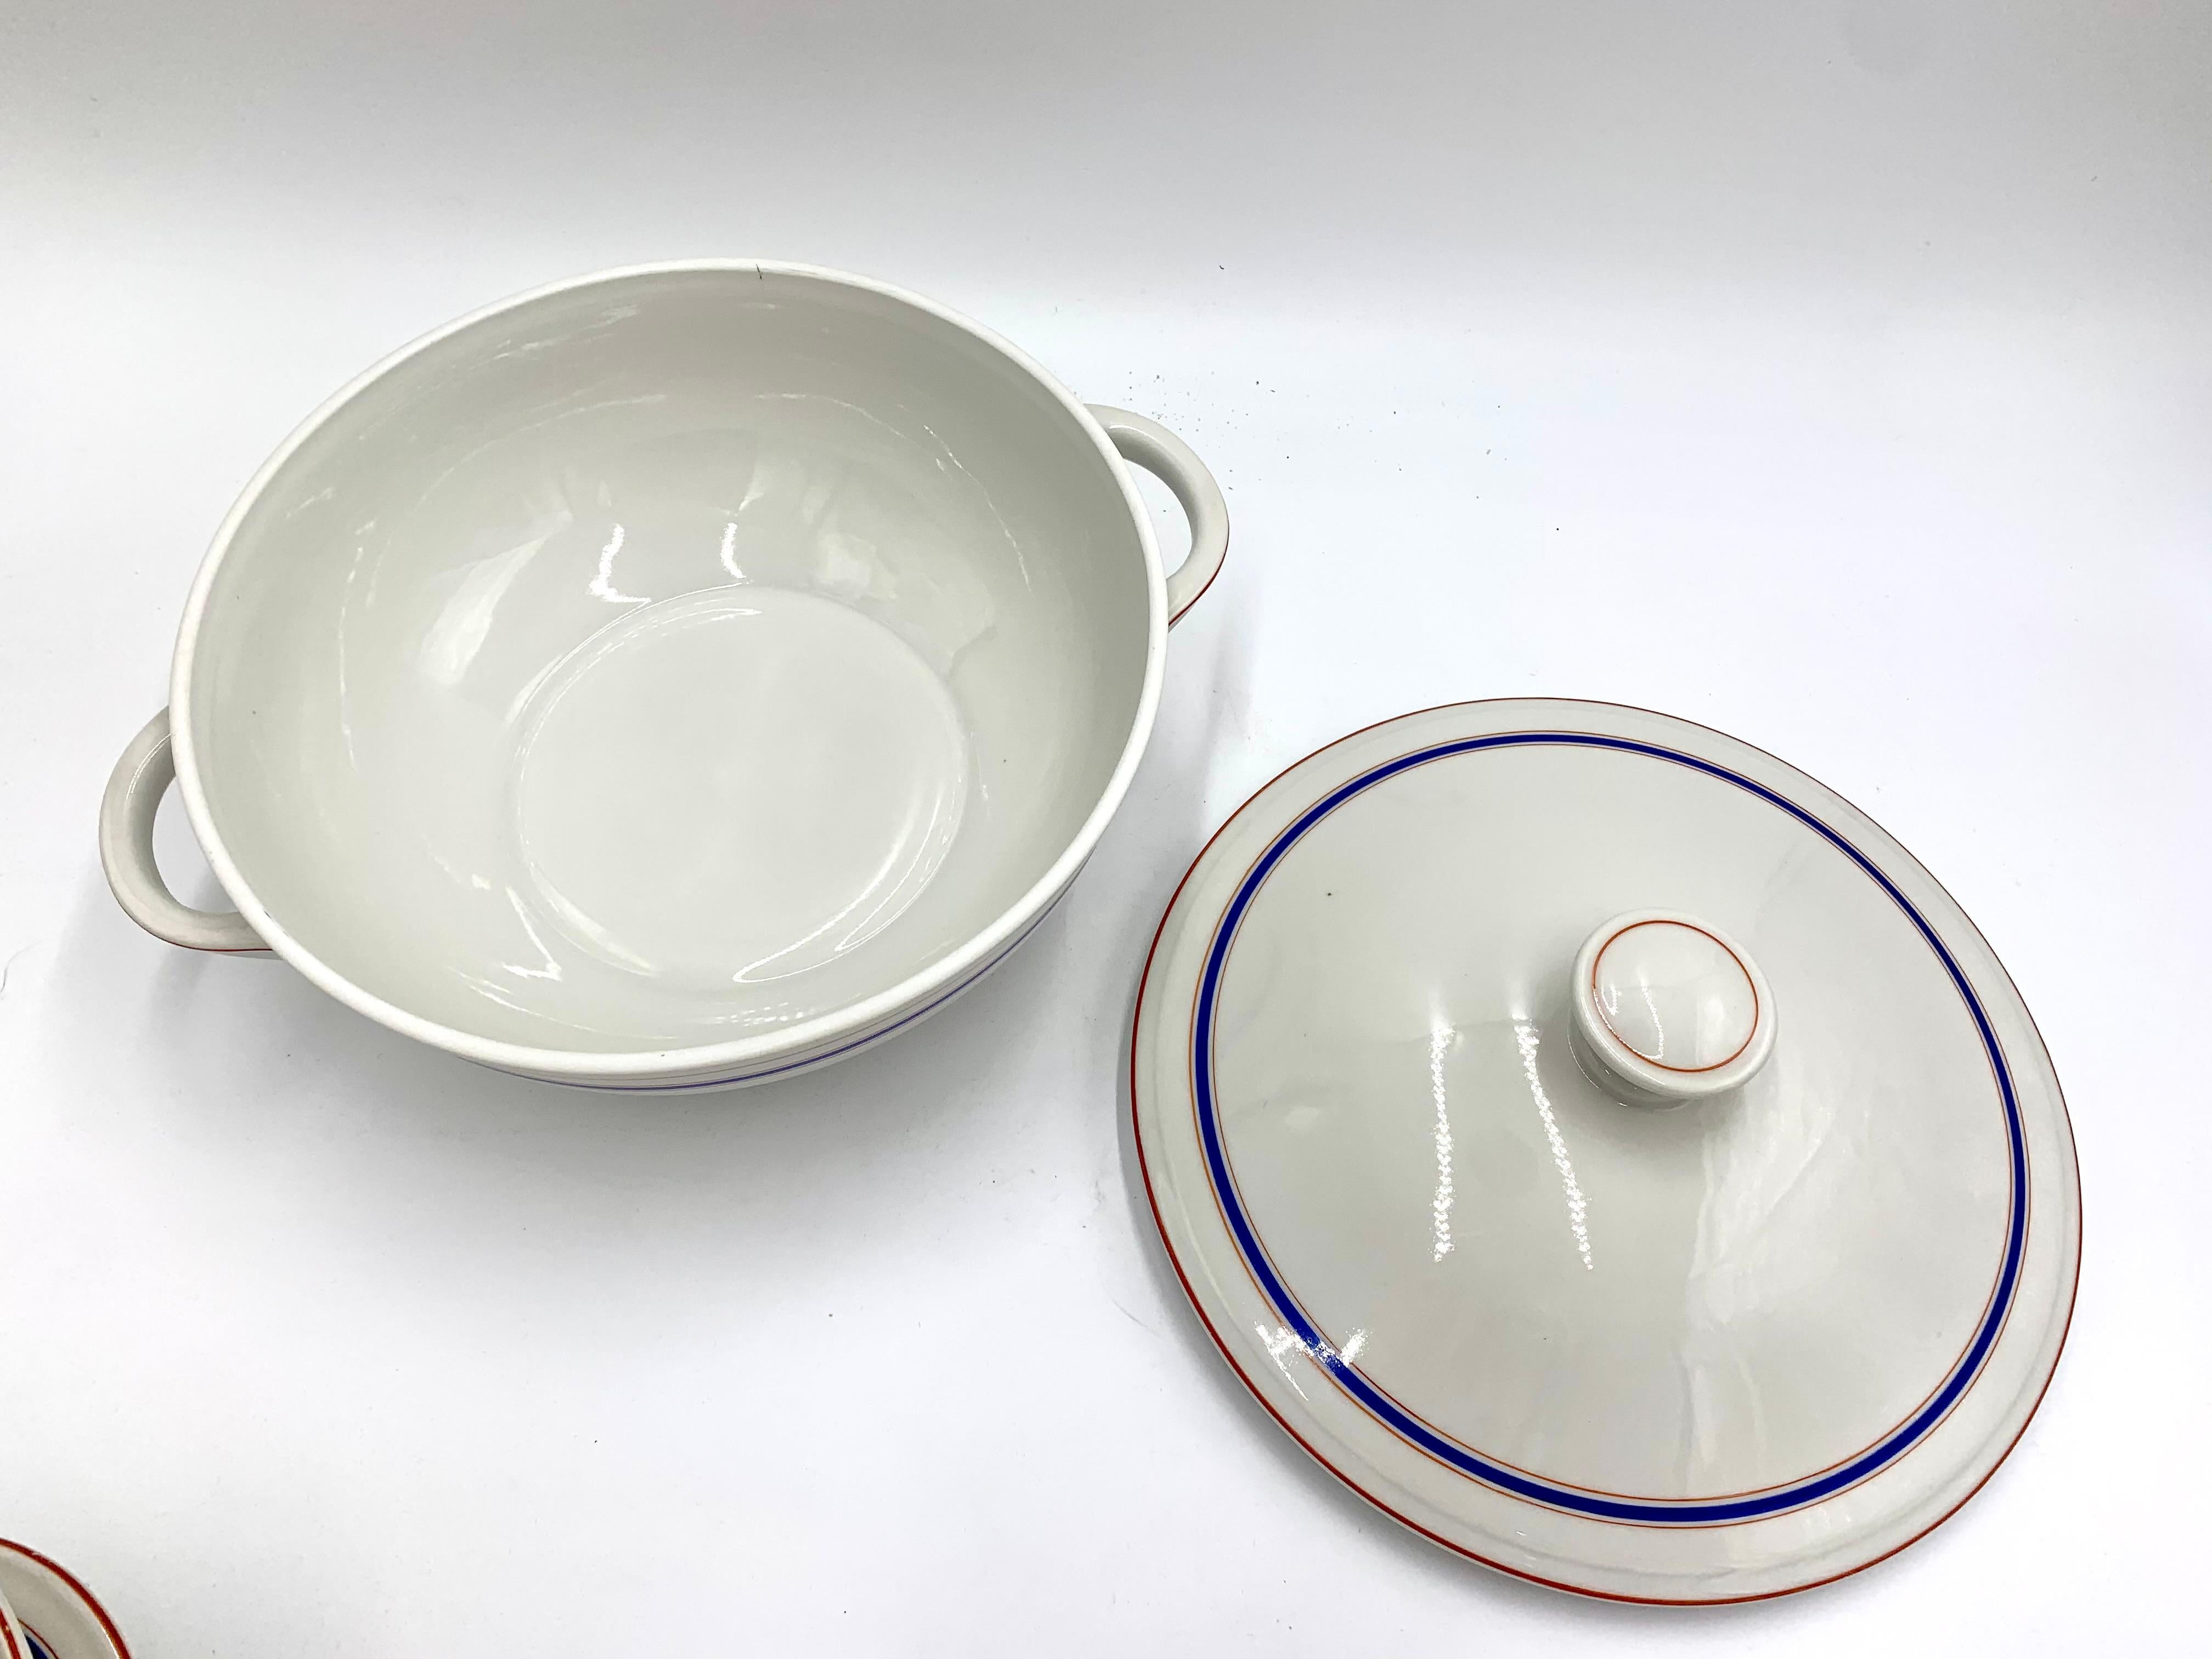 Parts of the Koenigszelt Dinner Set, 1940s In Good Condition For Sale In Chorzów, PL